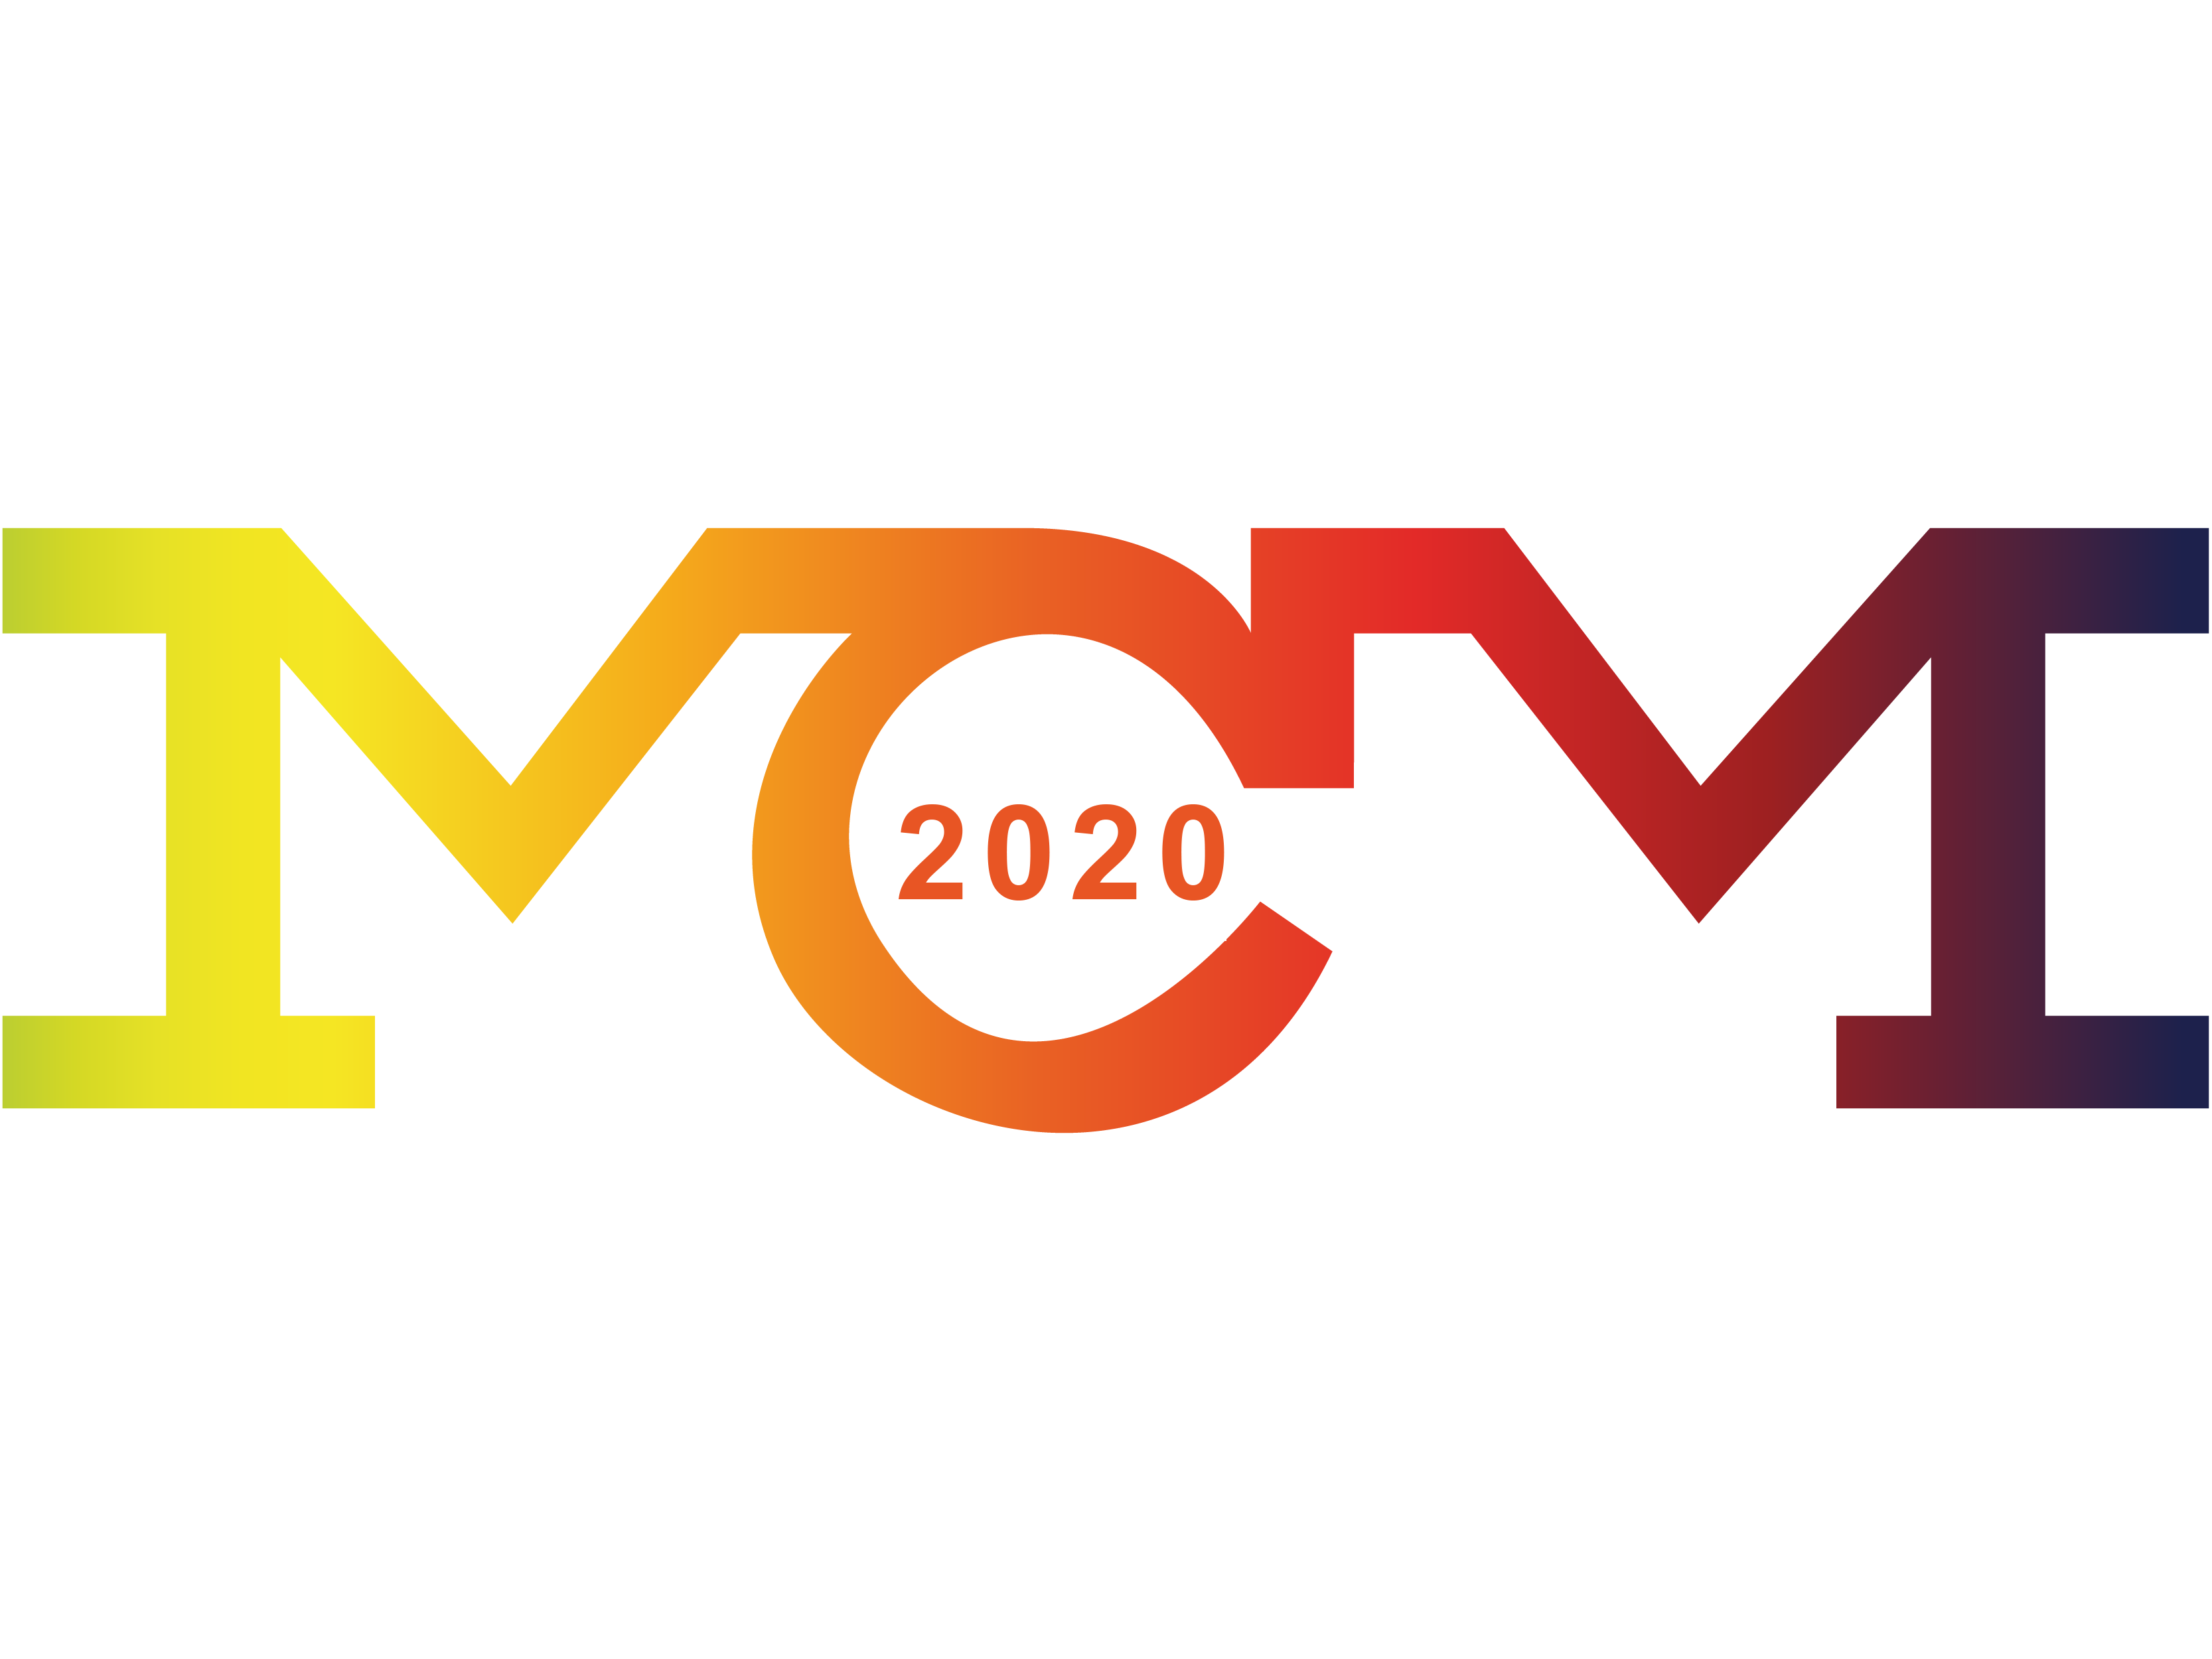 6th World Congress on Mechanical, Chemical, and Material Engineering, August 16 - 18, 2020 | Prague, Czech Republic